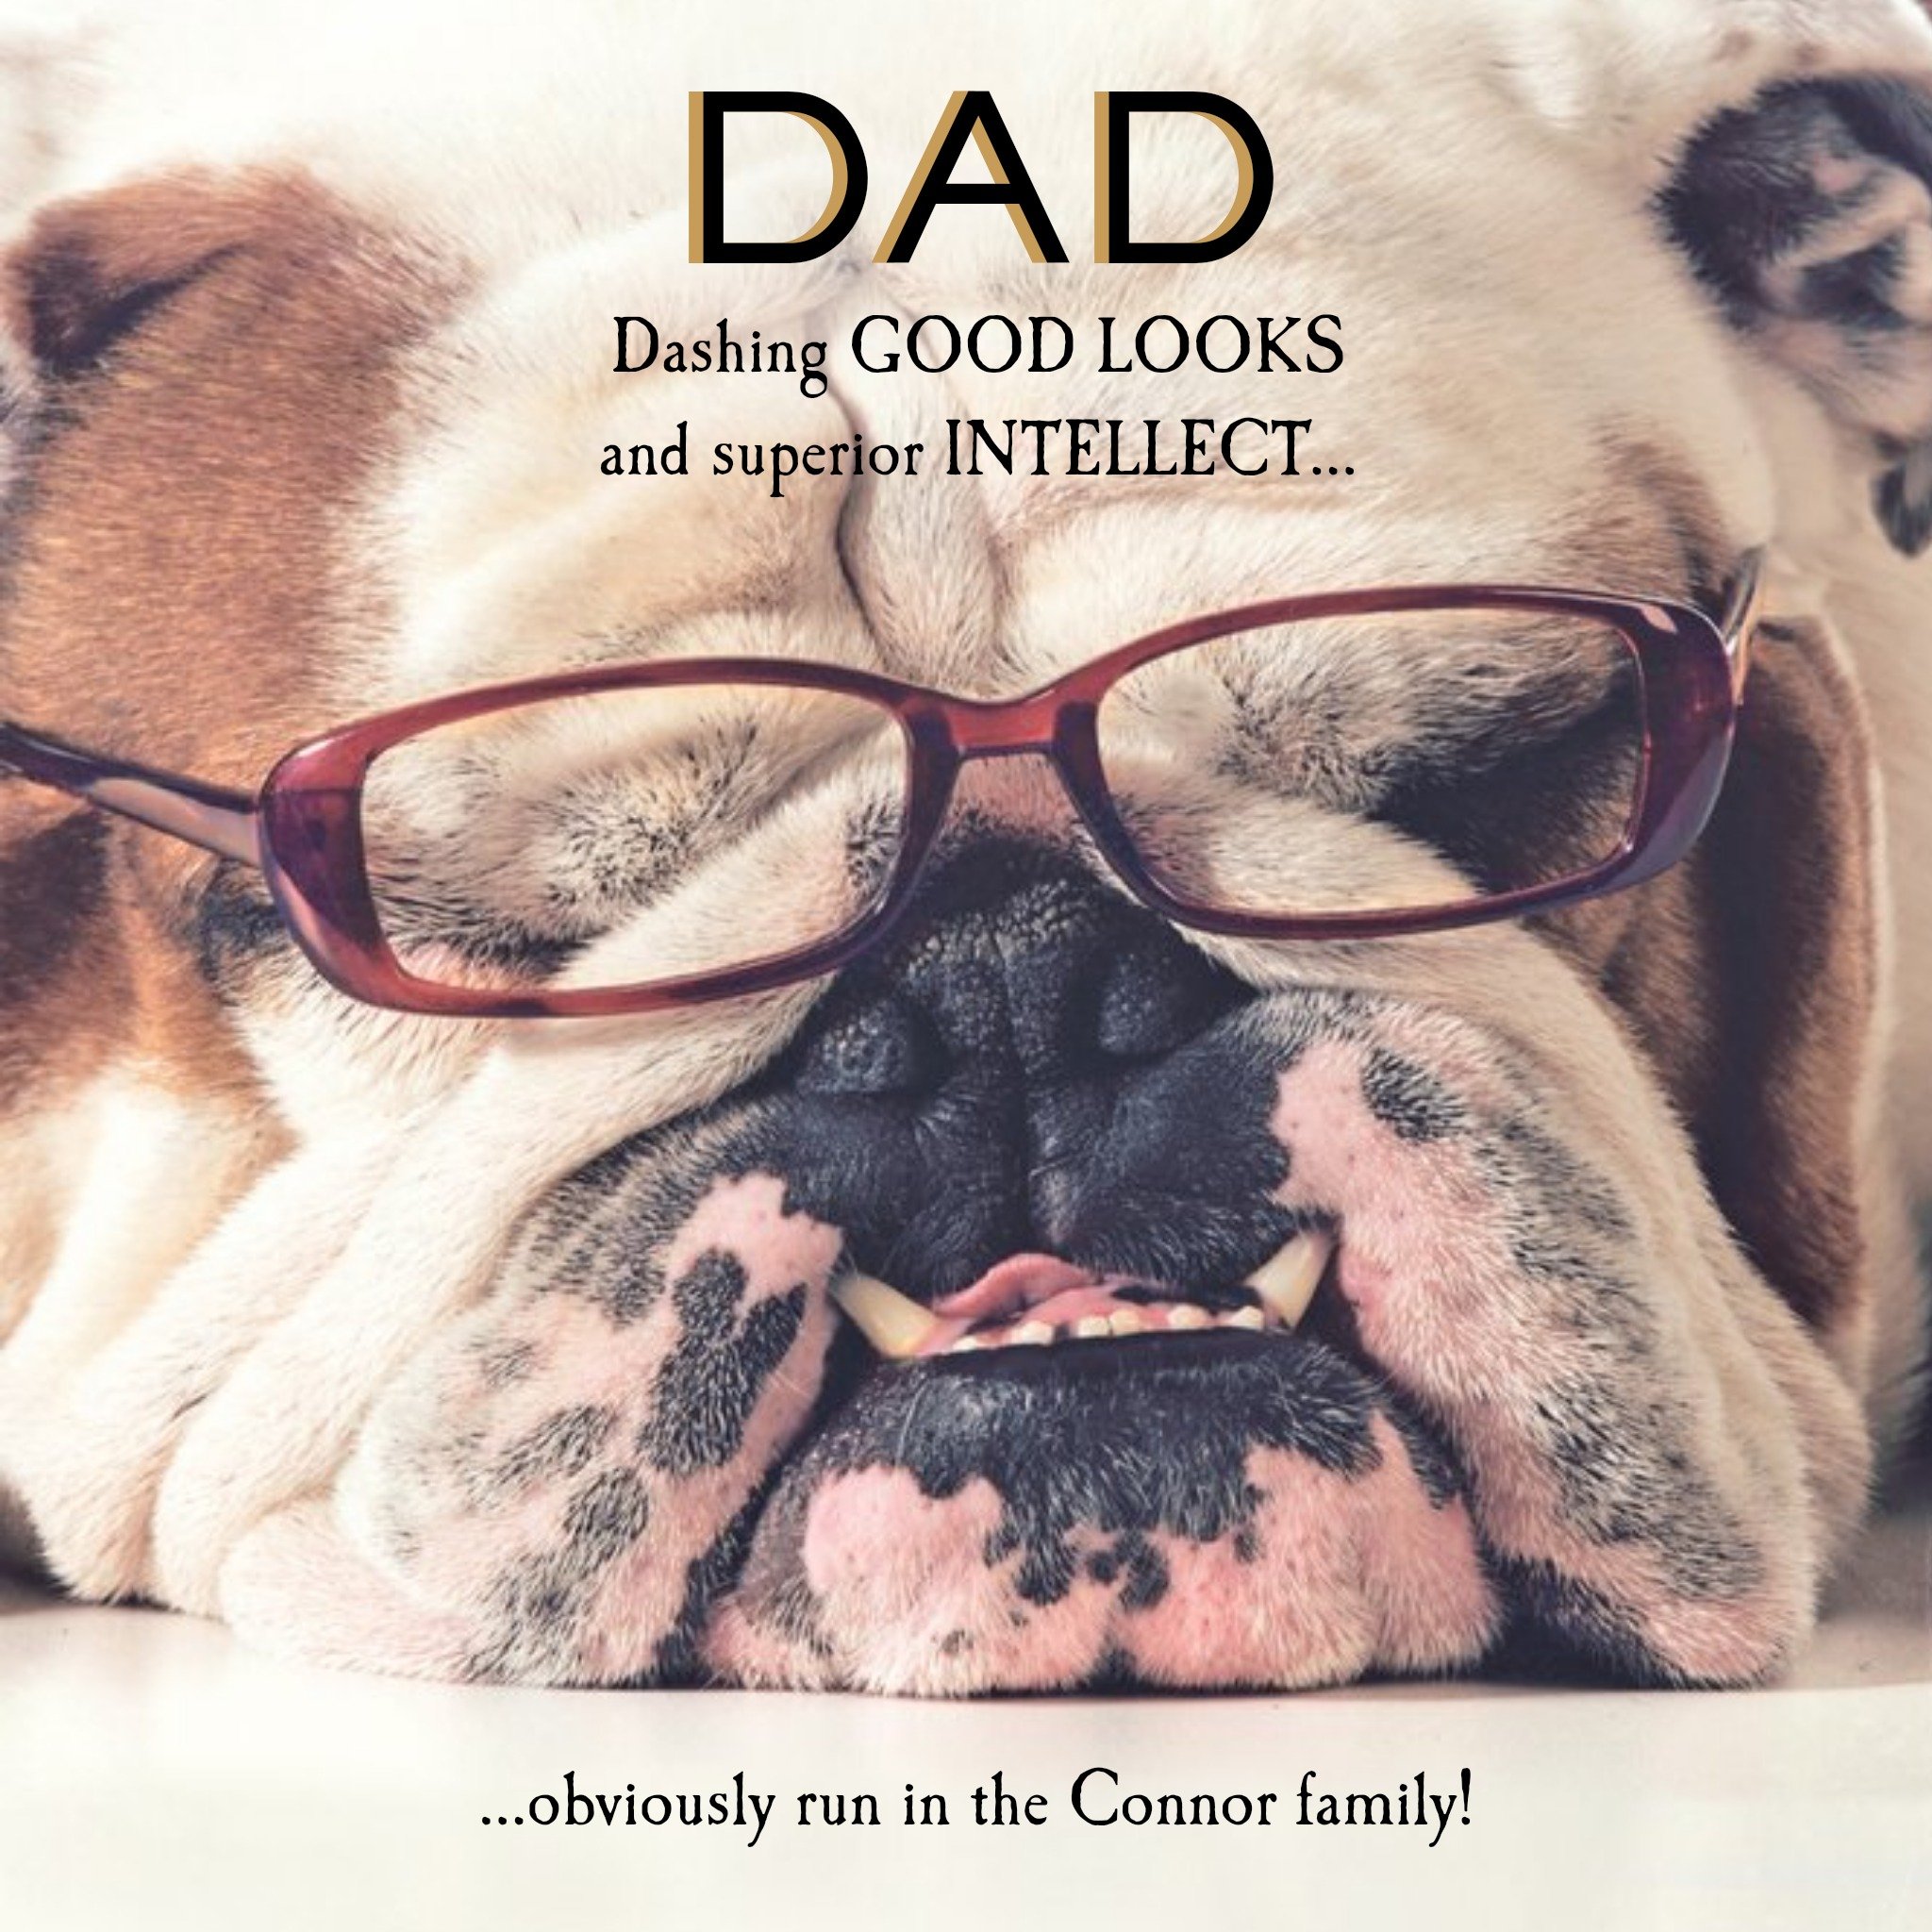 Moonpig Funny Good Looks And Intellect Run In The Family Personalised Dad Card, Large